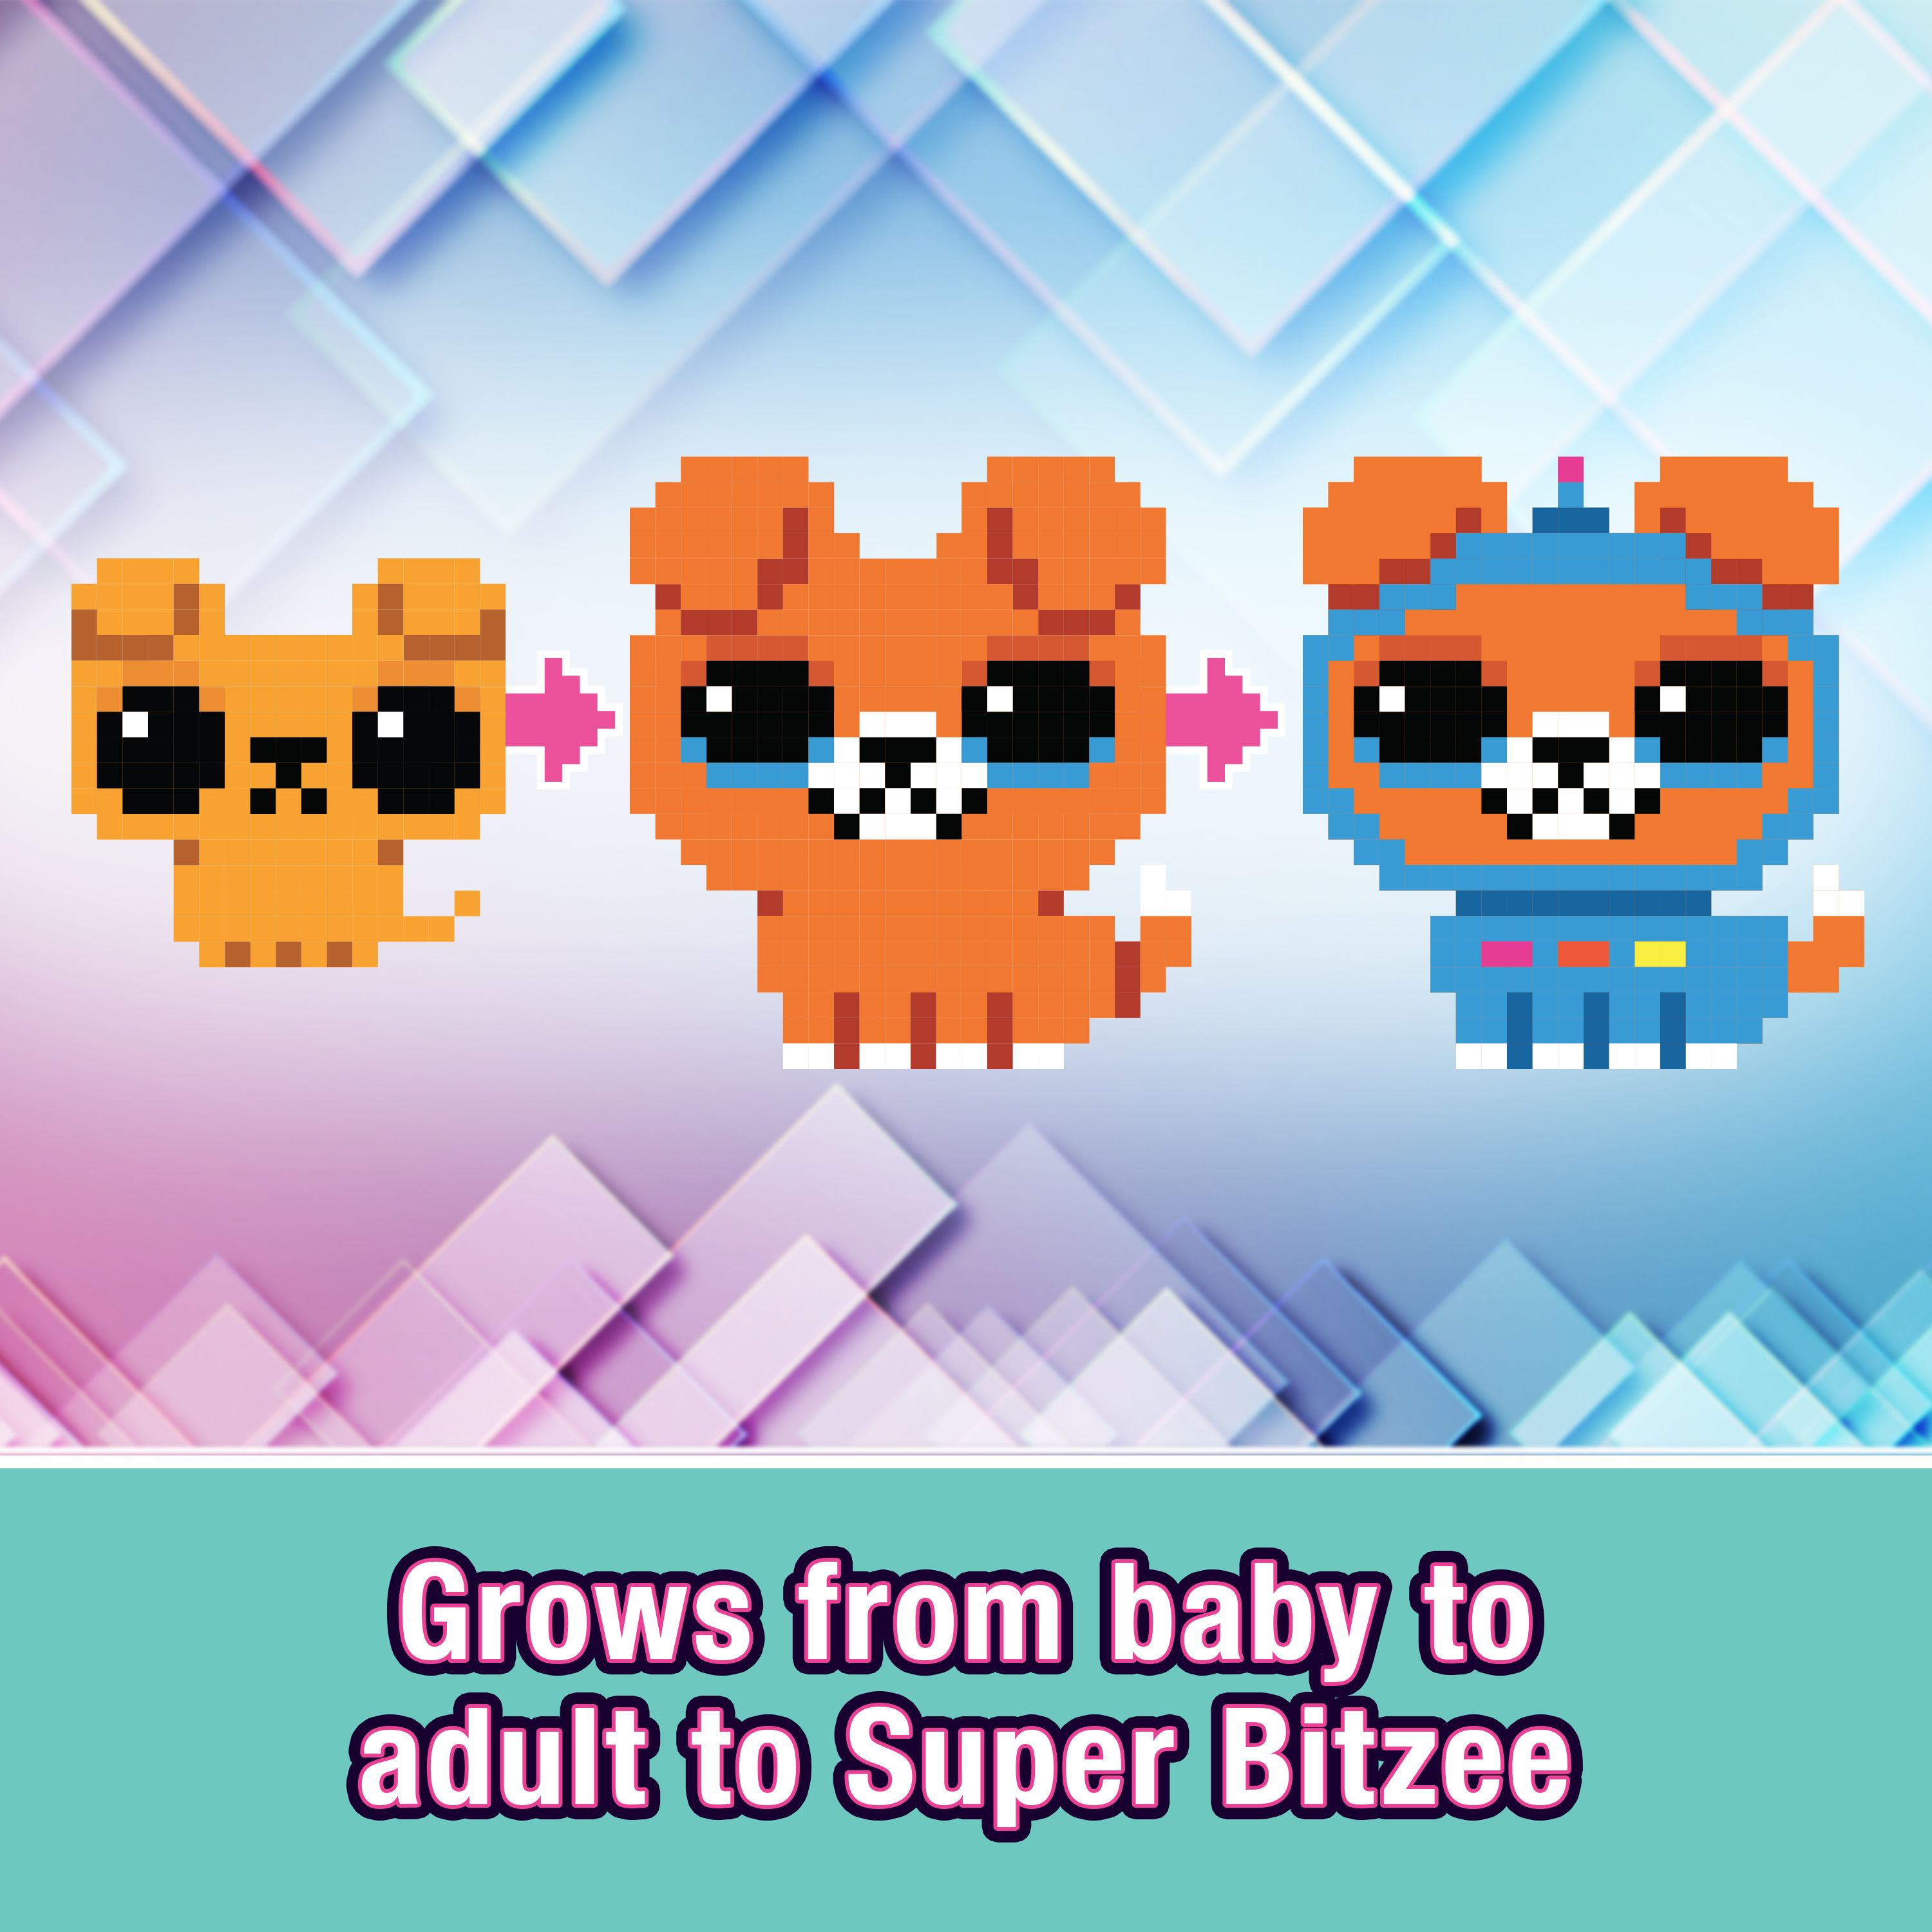 Grows from baby to adult to Super Bitzee